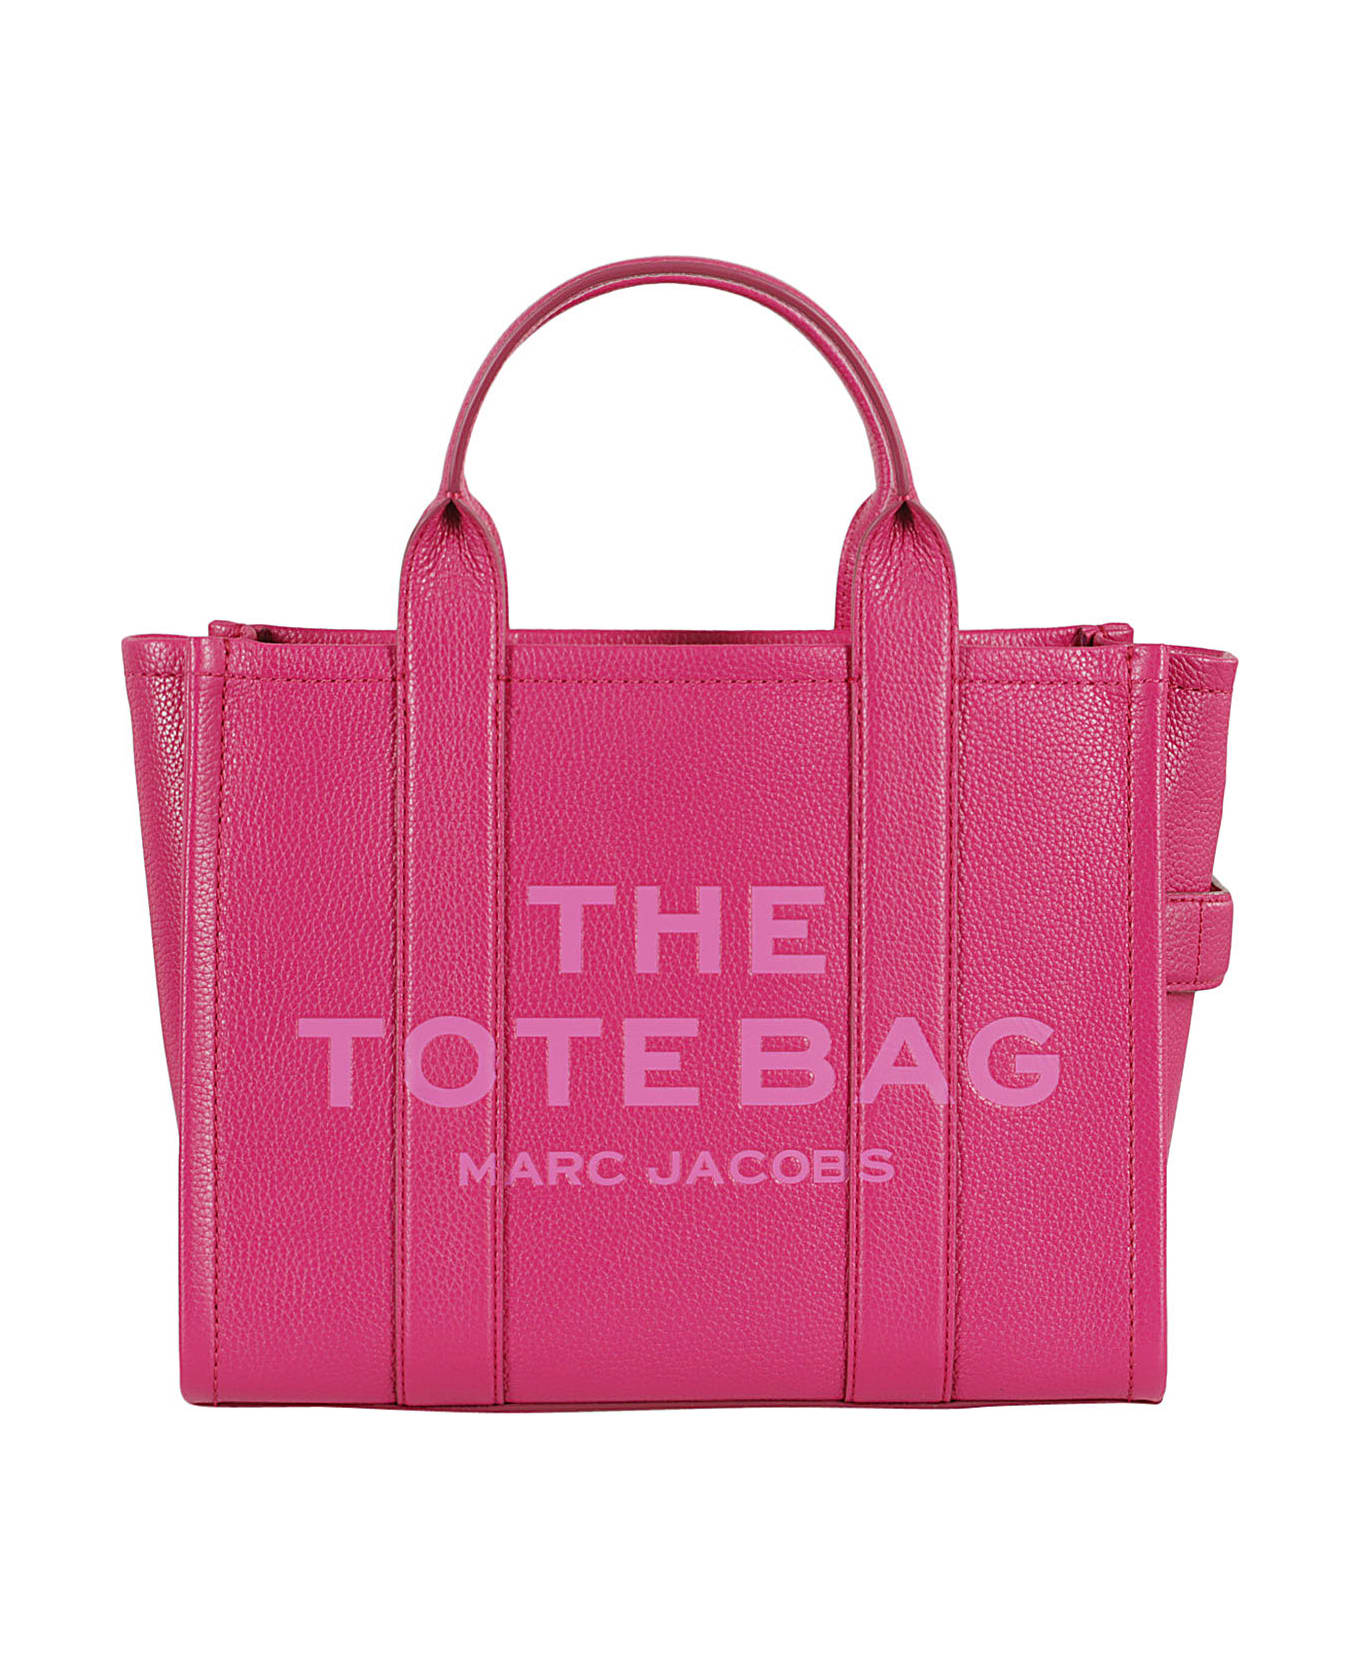 Marc Jacobs The Medium Tote - Lipstick Pink トートバッグ